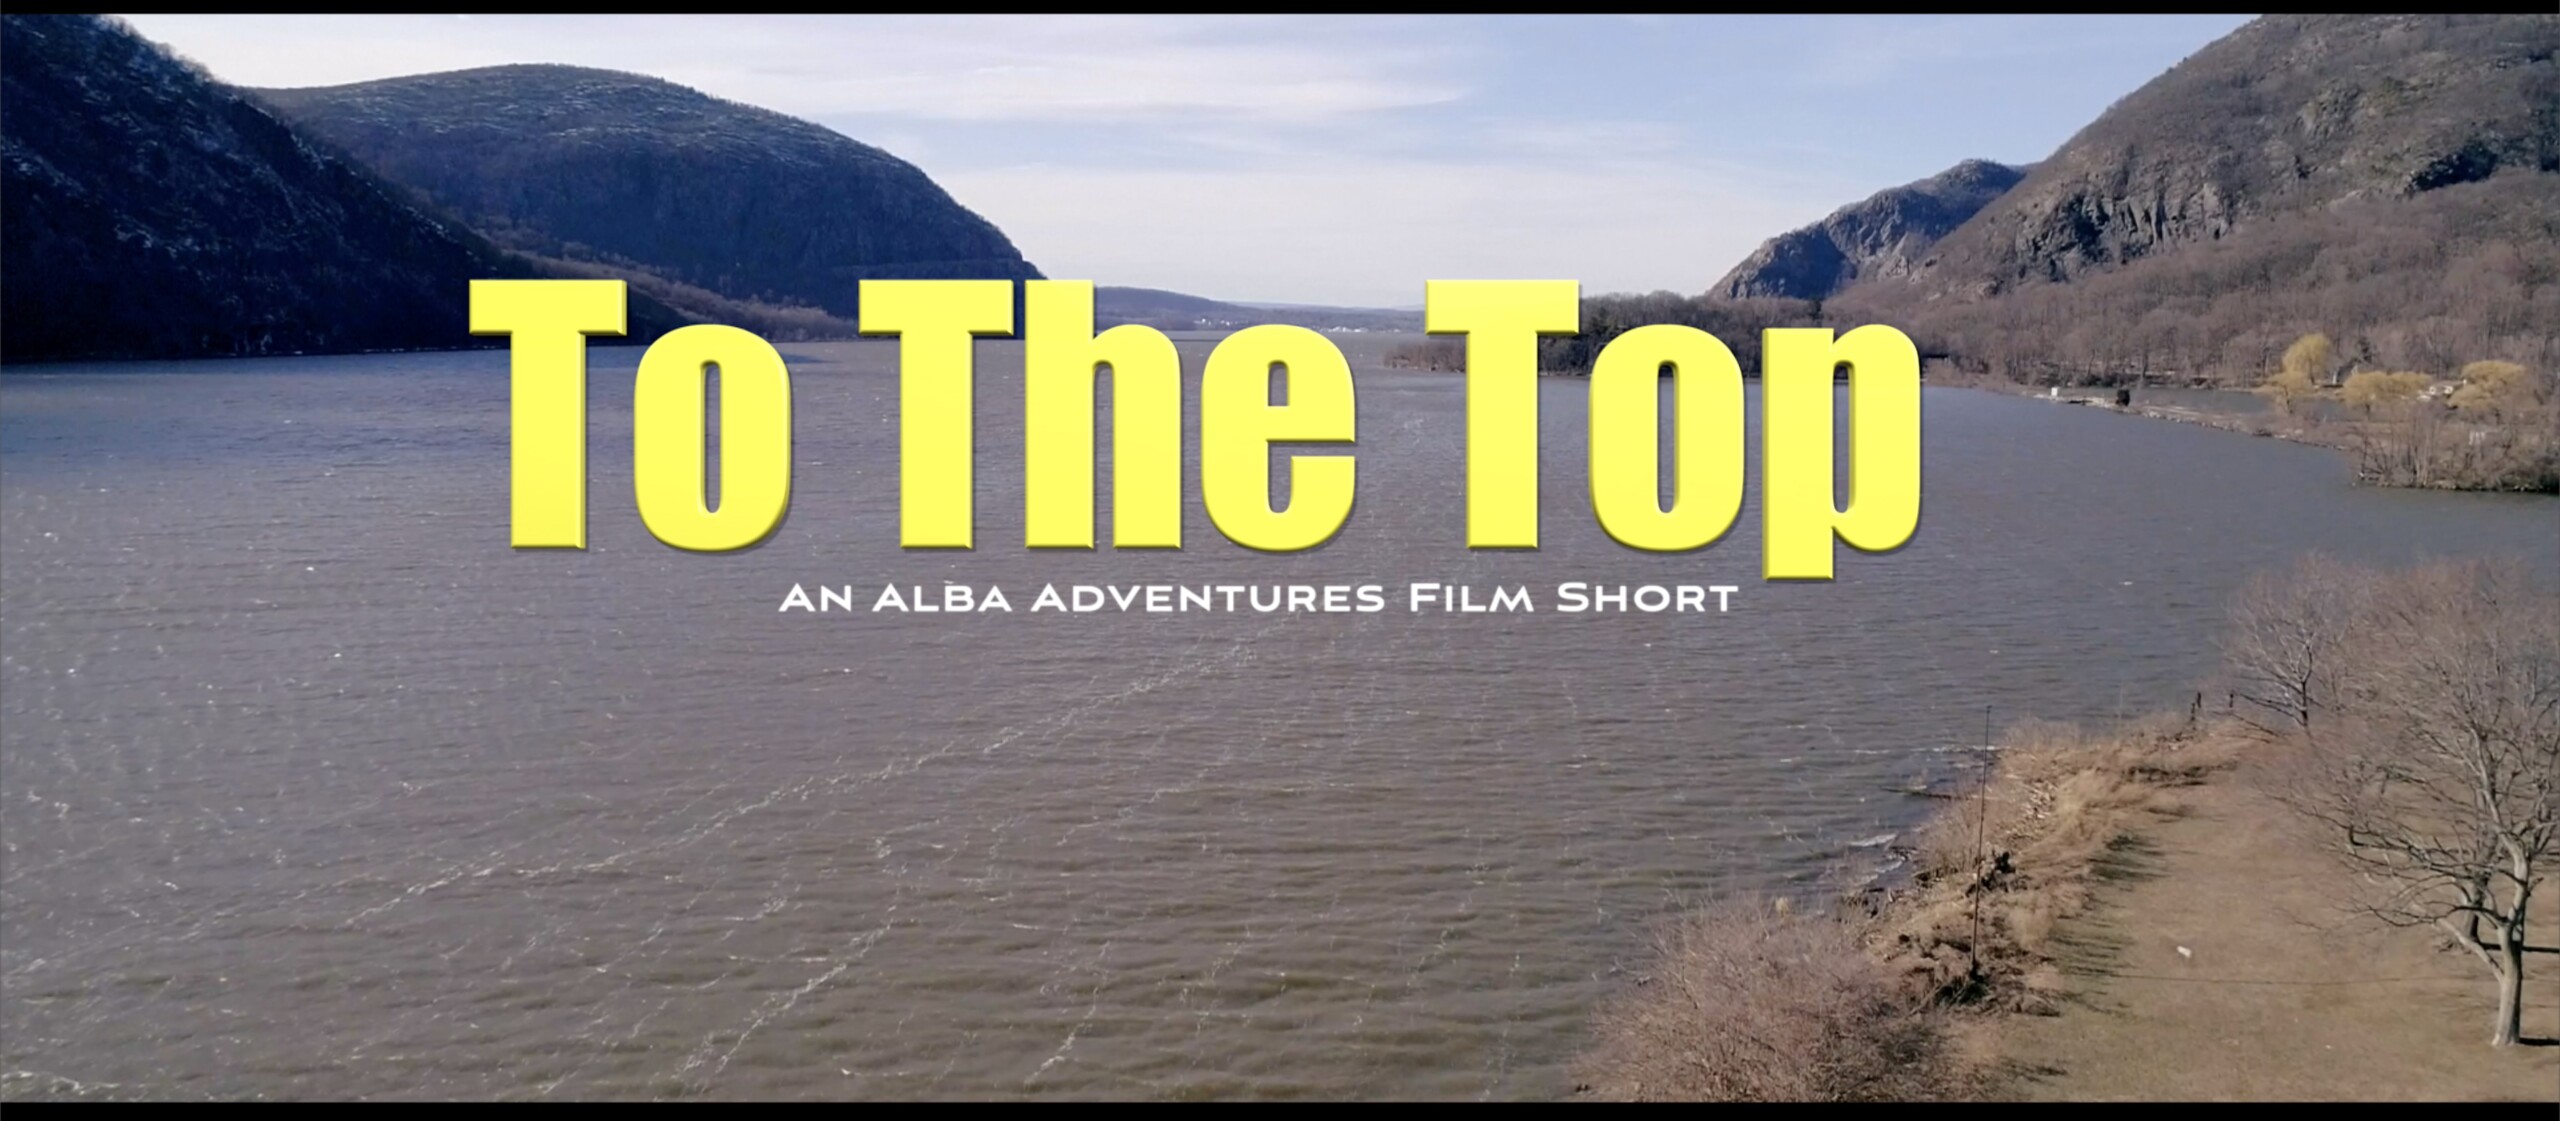 To The Top Cover Image to Film Short